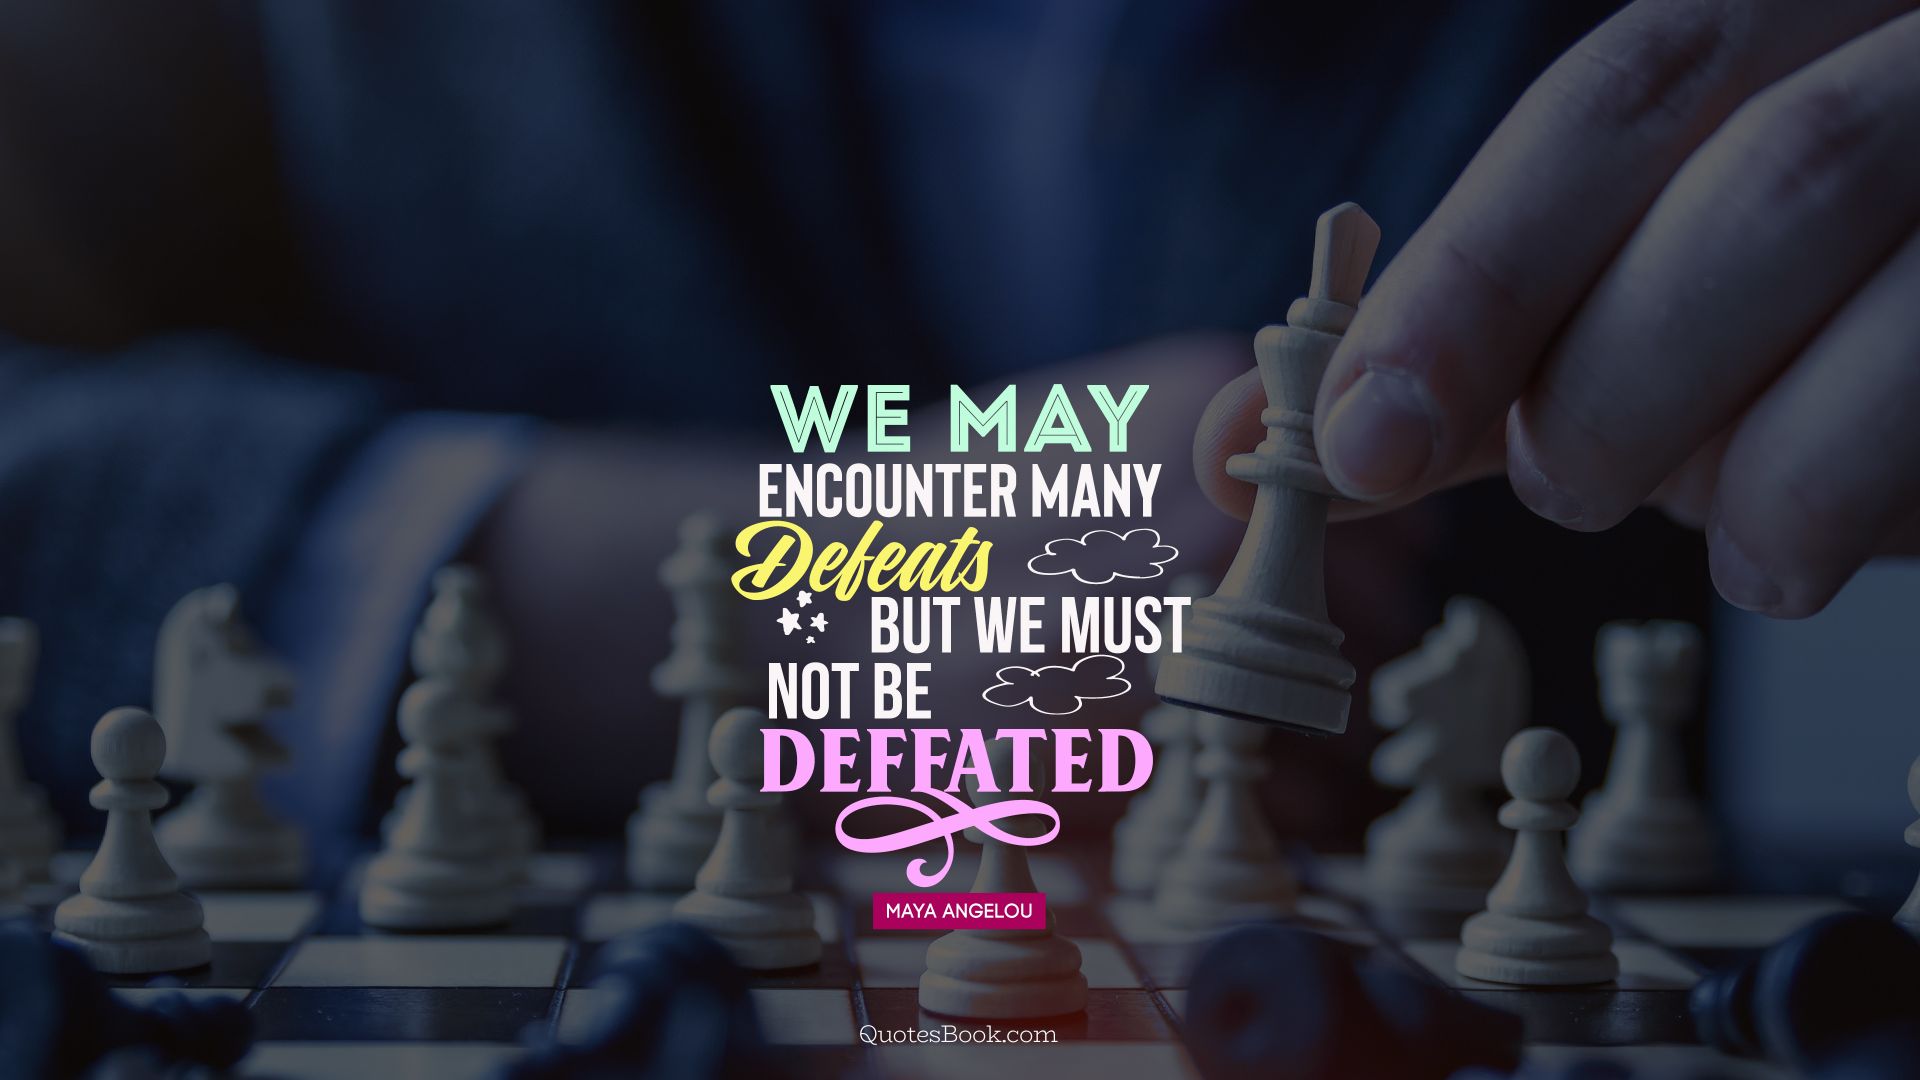 We may encounter many defeats but we must not be defeated. - Quote by Maya Angelou